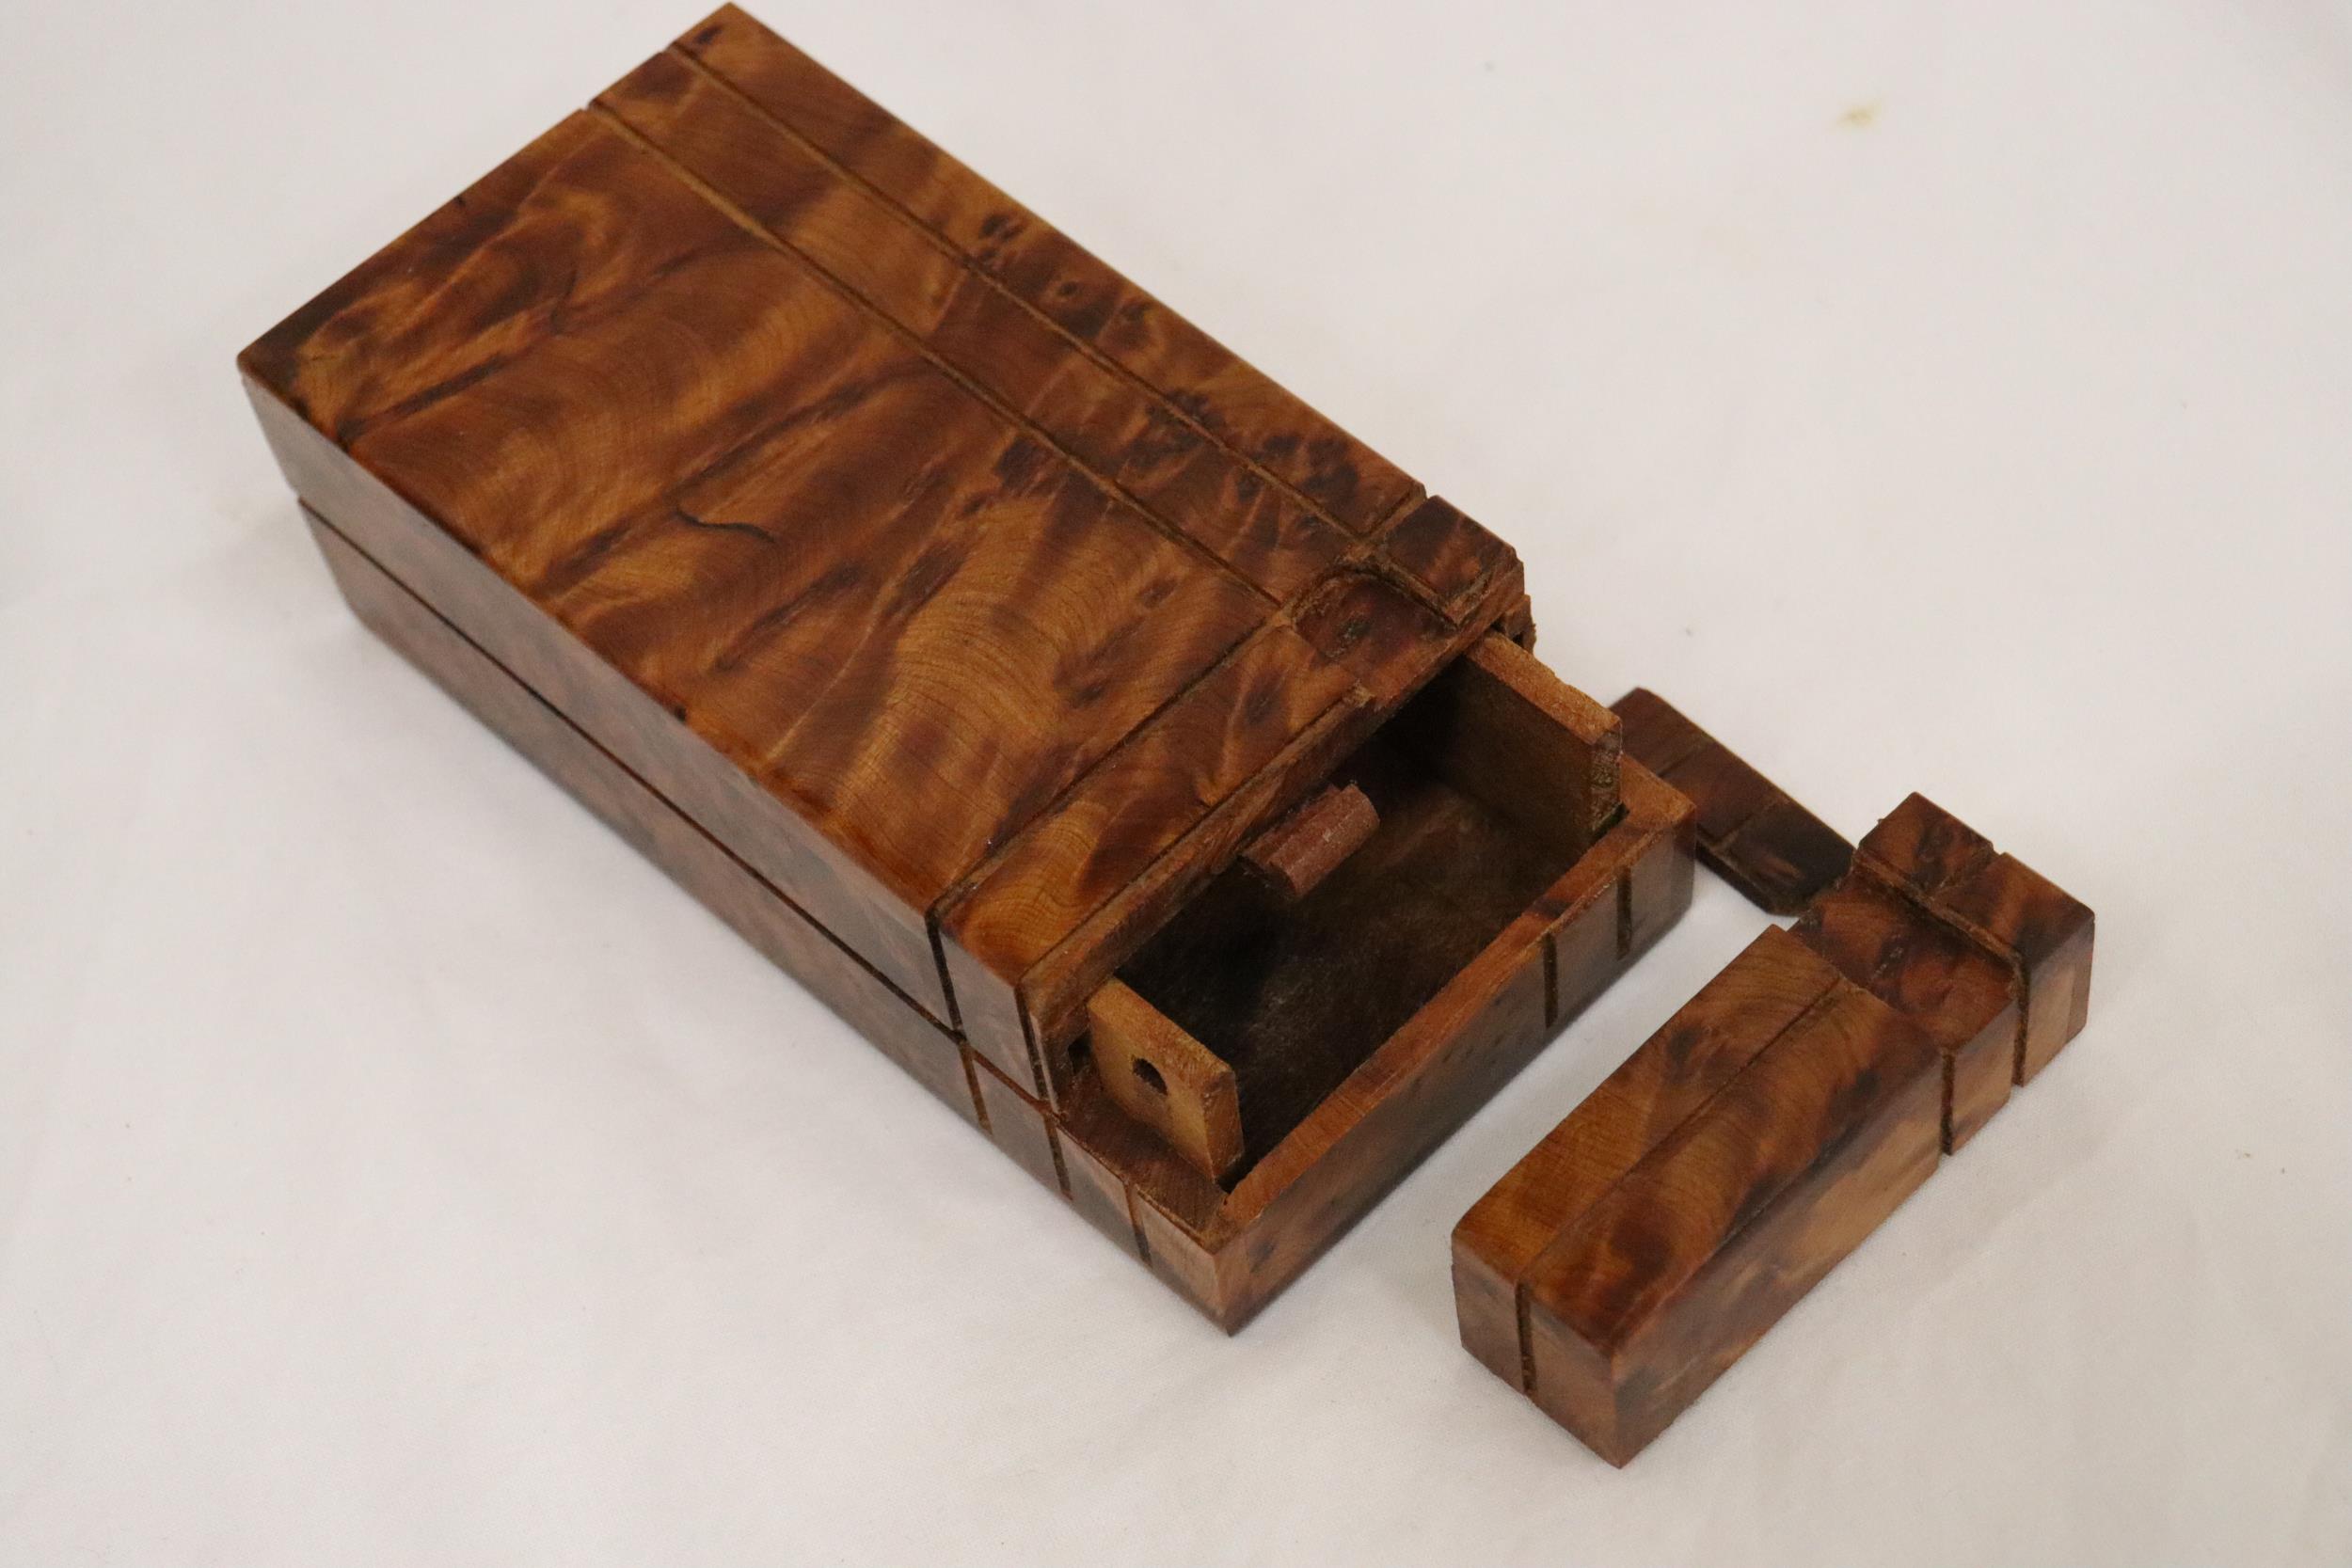 A THUYA WOODEN BOX WITH FOUR COMPARTMENTS TOGETHER WITH A WOODEN DESK TIDY AND PUZZLE BOX - Image 6 of 8